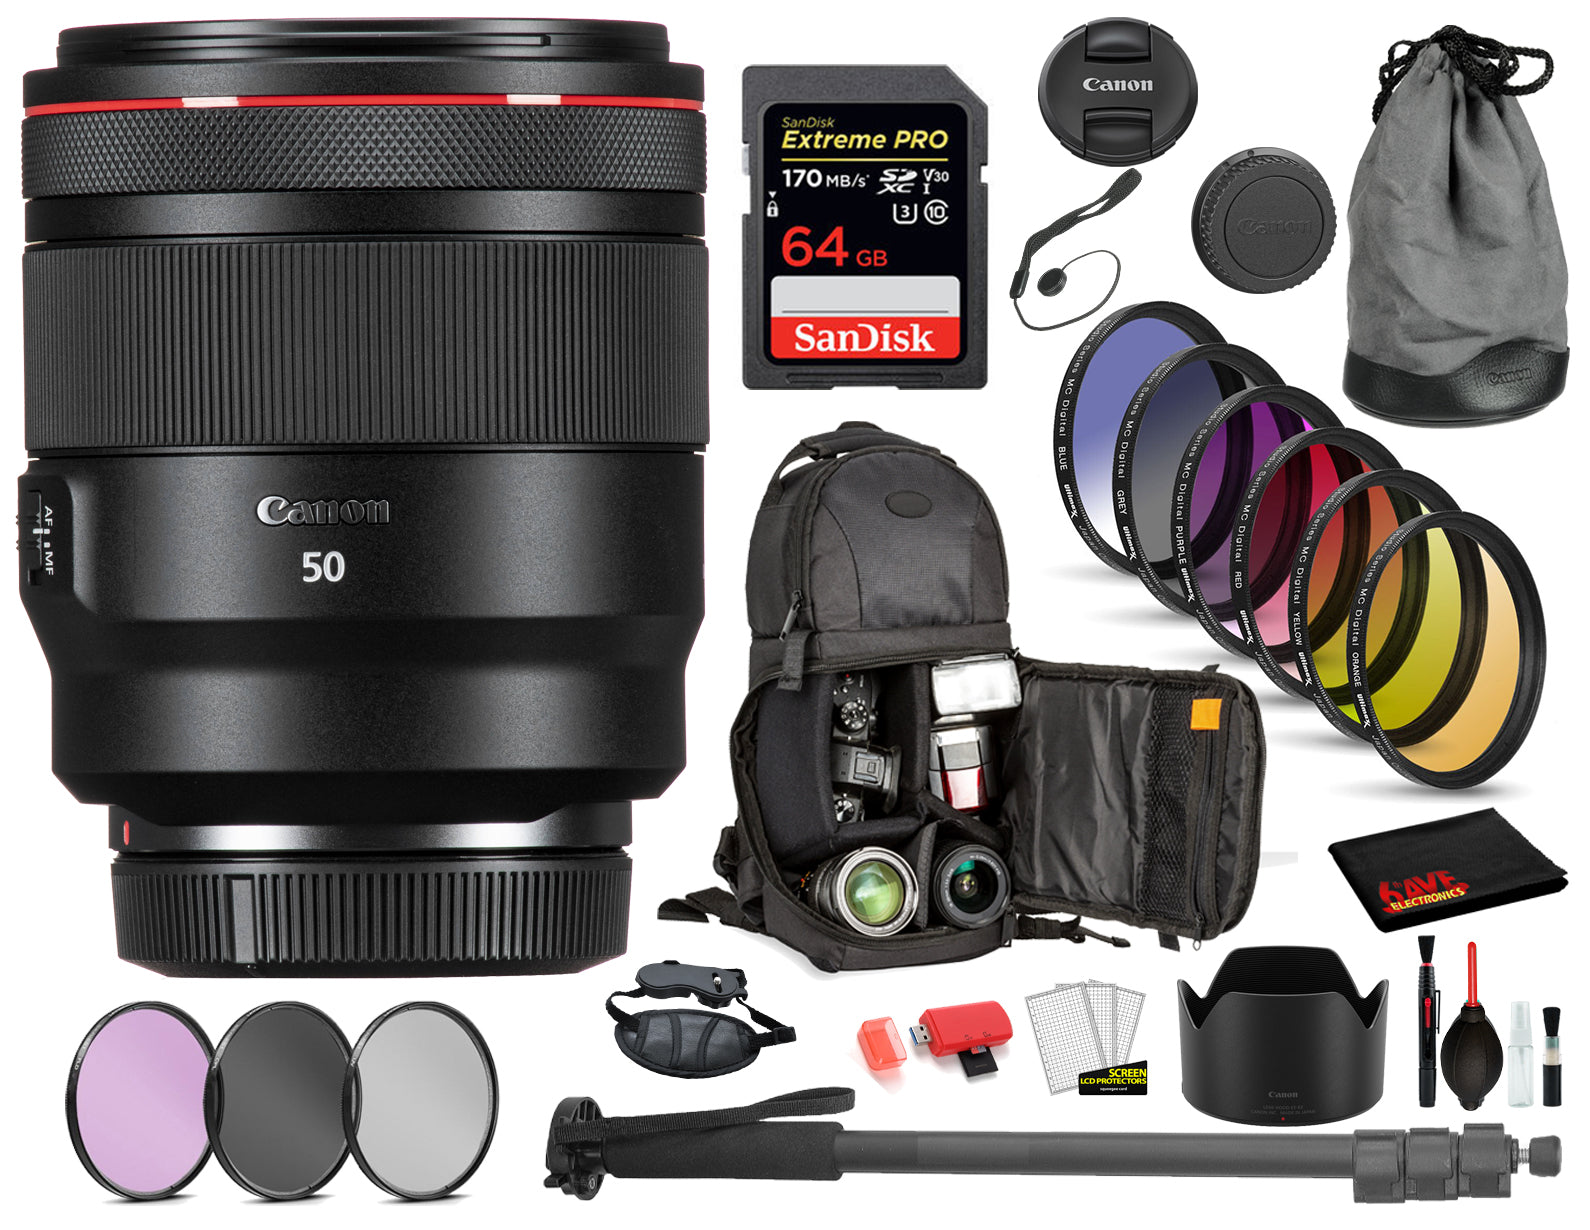 Canon RF 50mm f/1.2L USM Lens  (2959C002) with Bundle  Includes: 9PC Filter Kit, Sandisk Extreme PRO 64GB Card + More